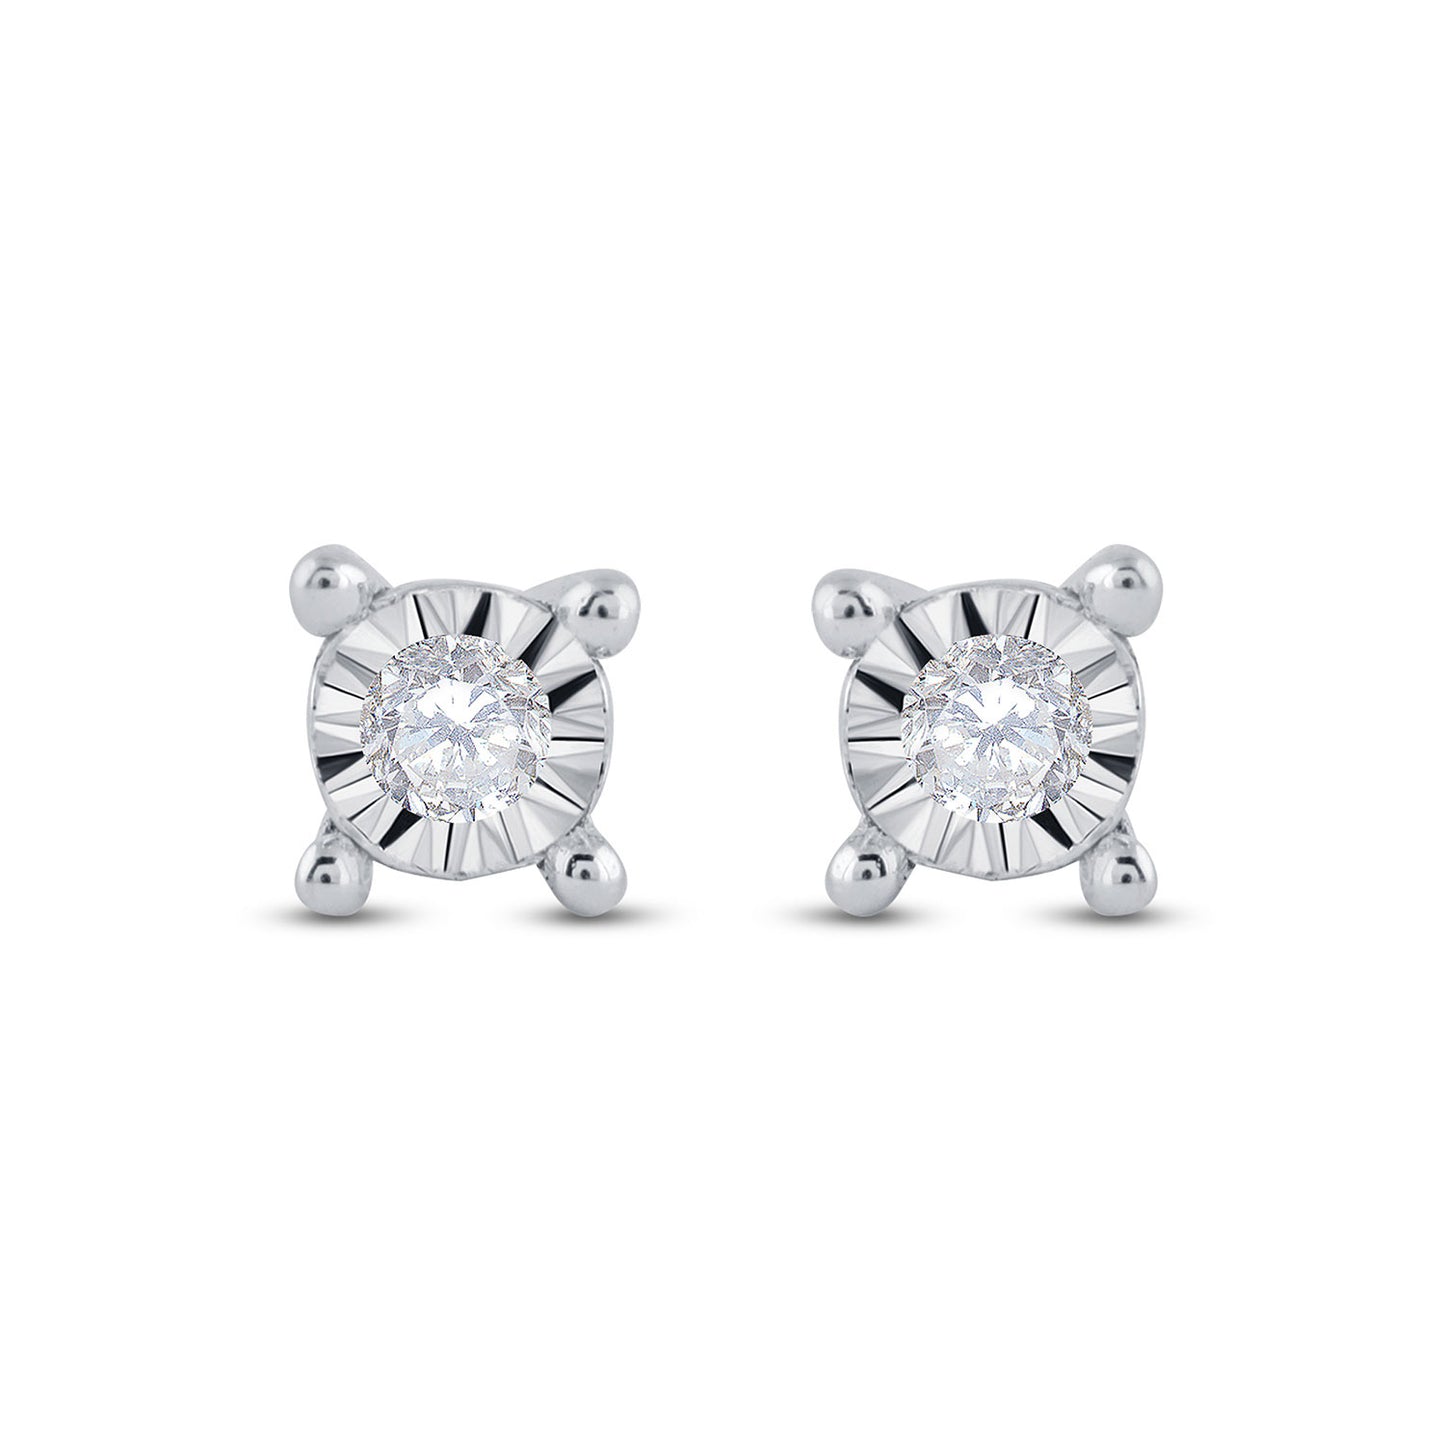 GND 10Kt White Gold Womens Round Diamond Stud Earrings 1/20 Cttw